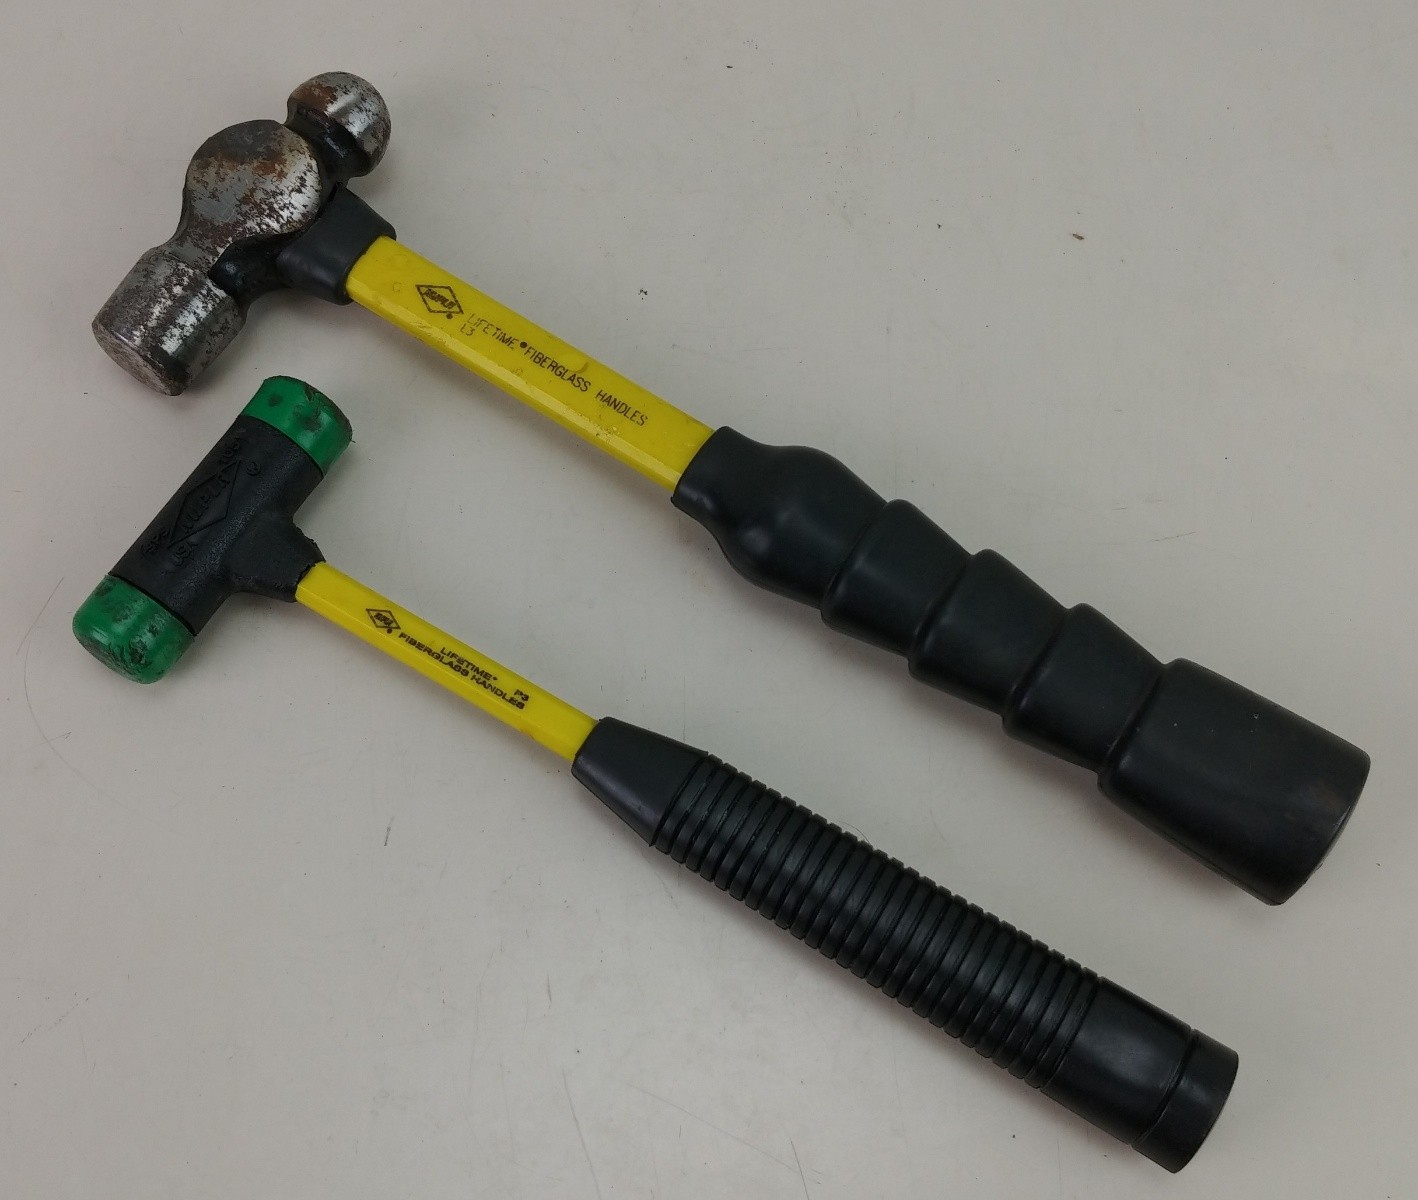 NUPLA  SPS-105 & 16oz Ball Pean Hammers Used